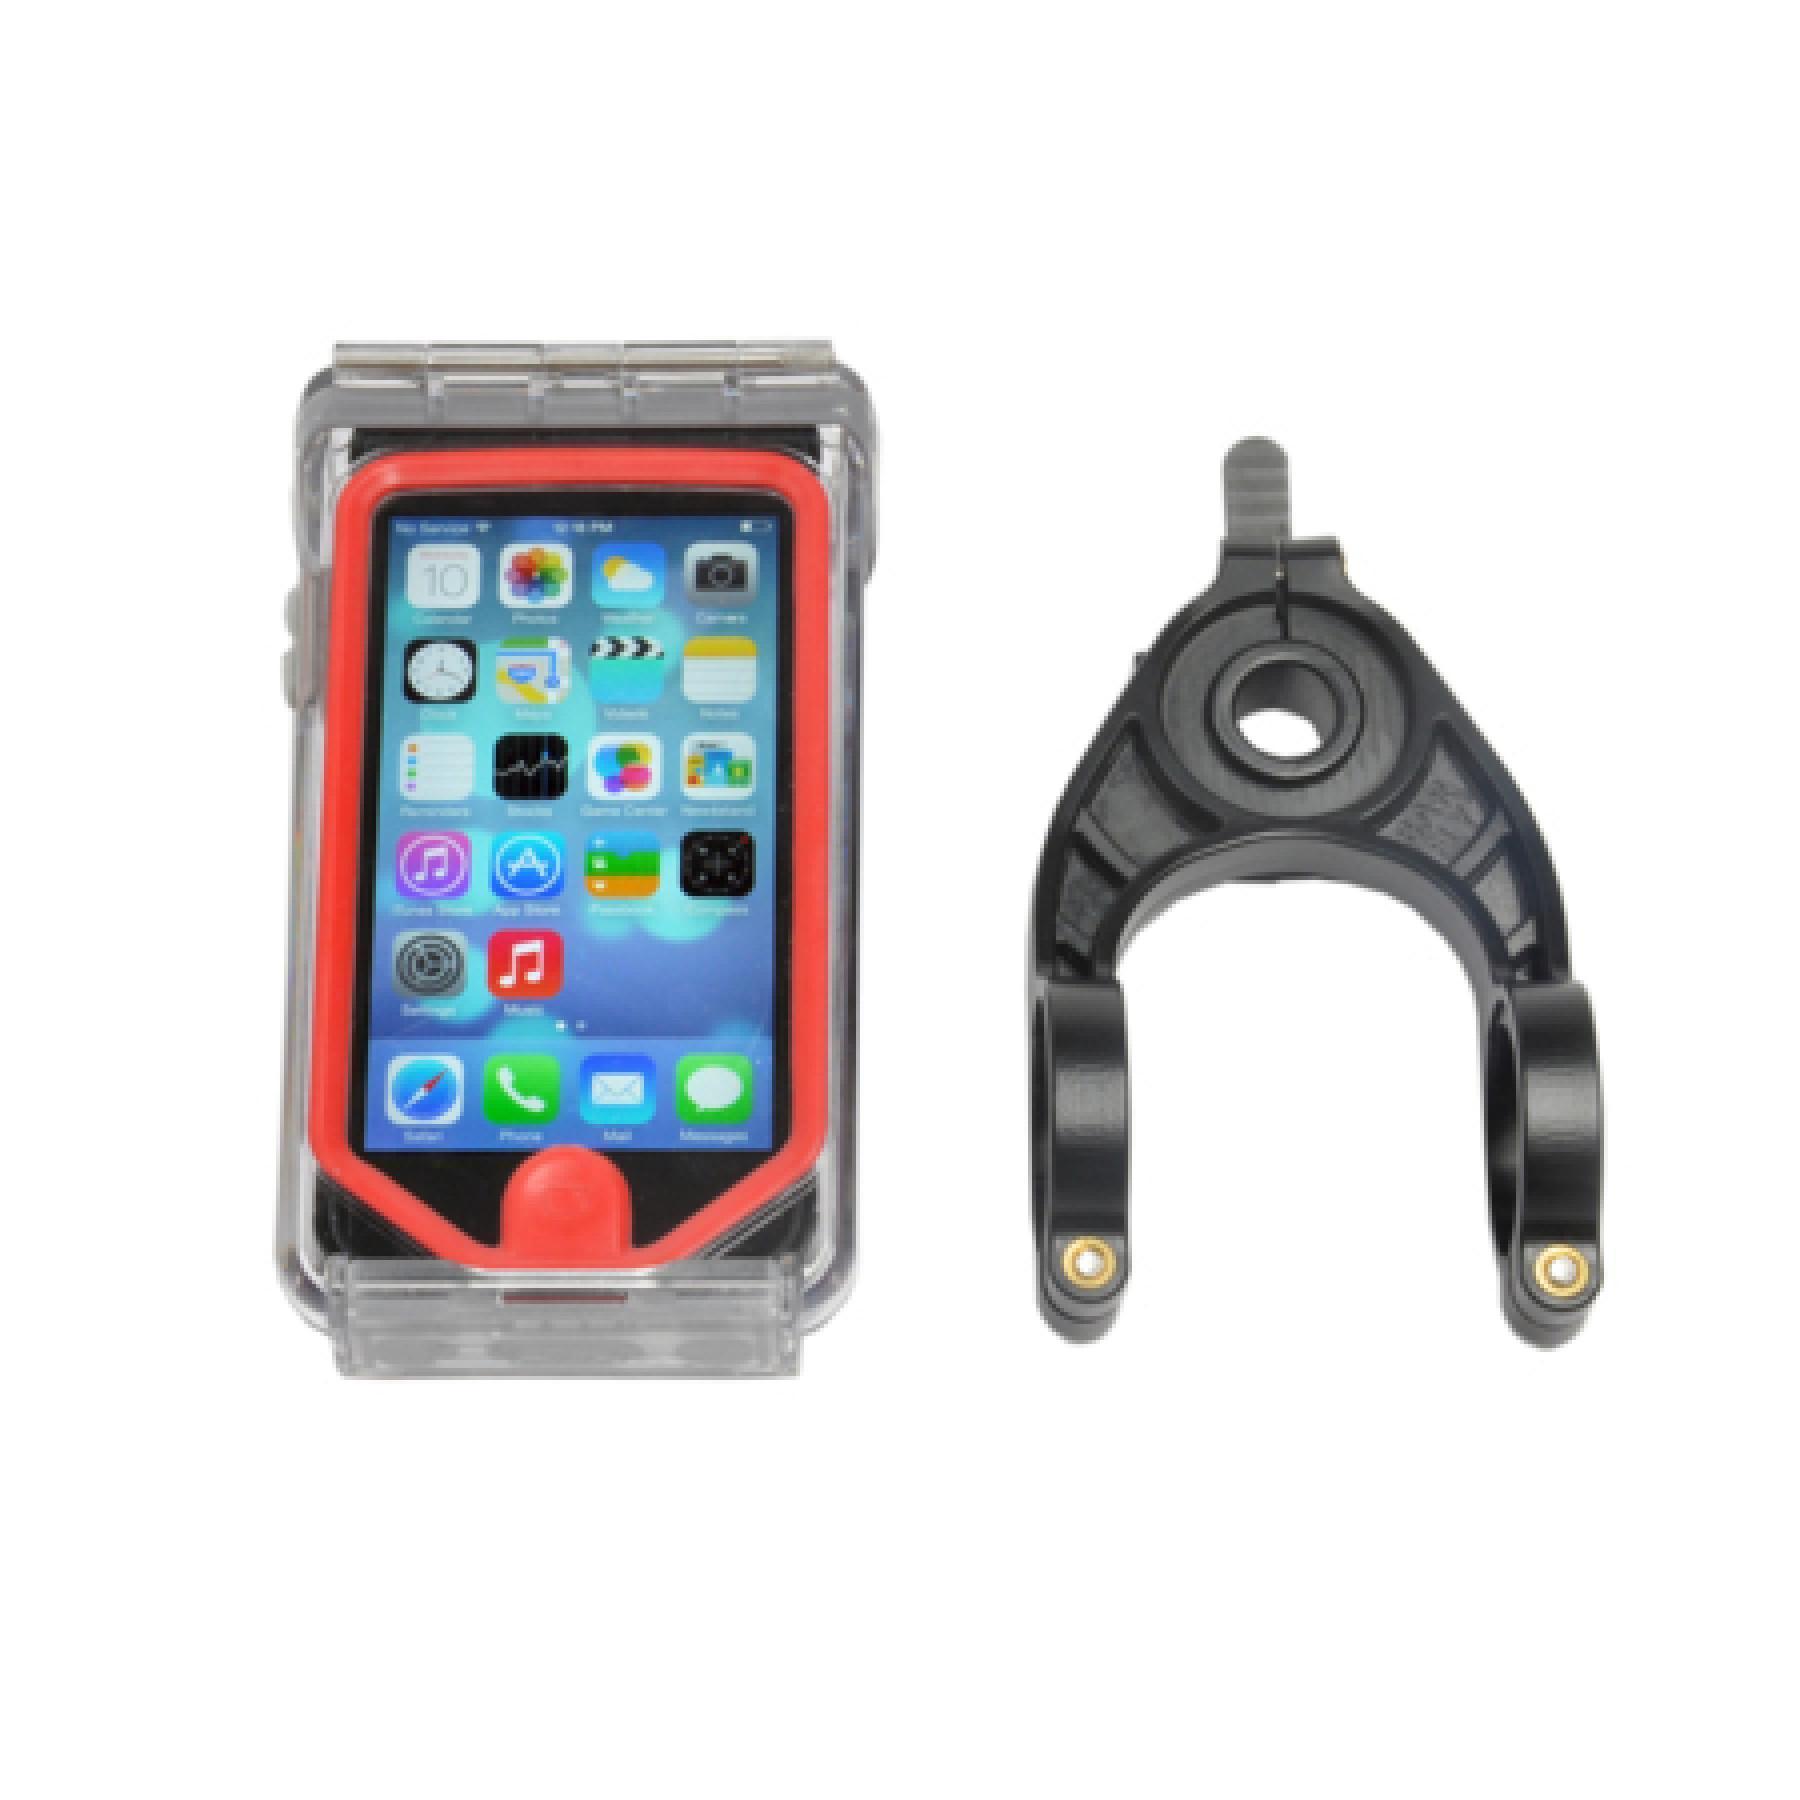 Support de téléphone frontal Barfly The Bar Fly pour iPhone 5/5S